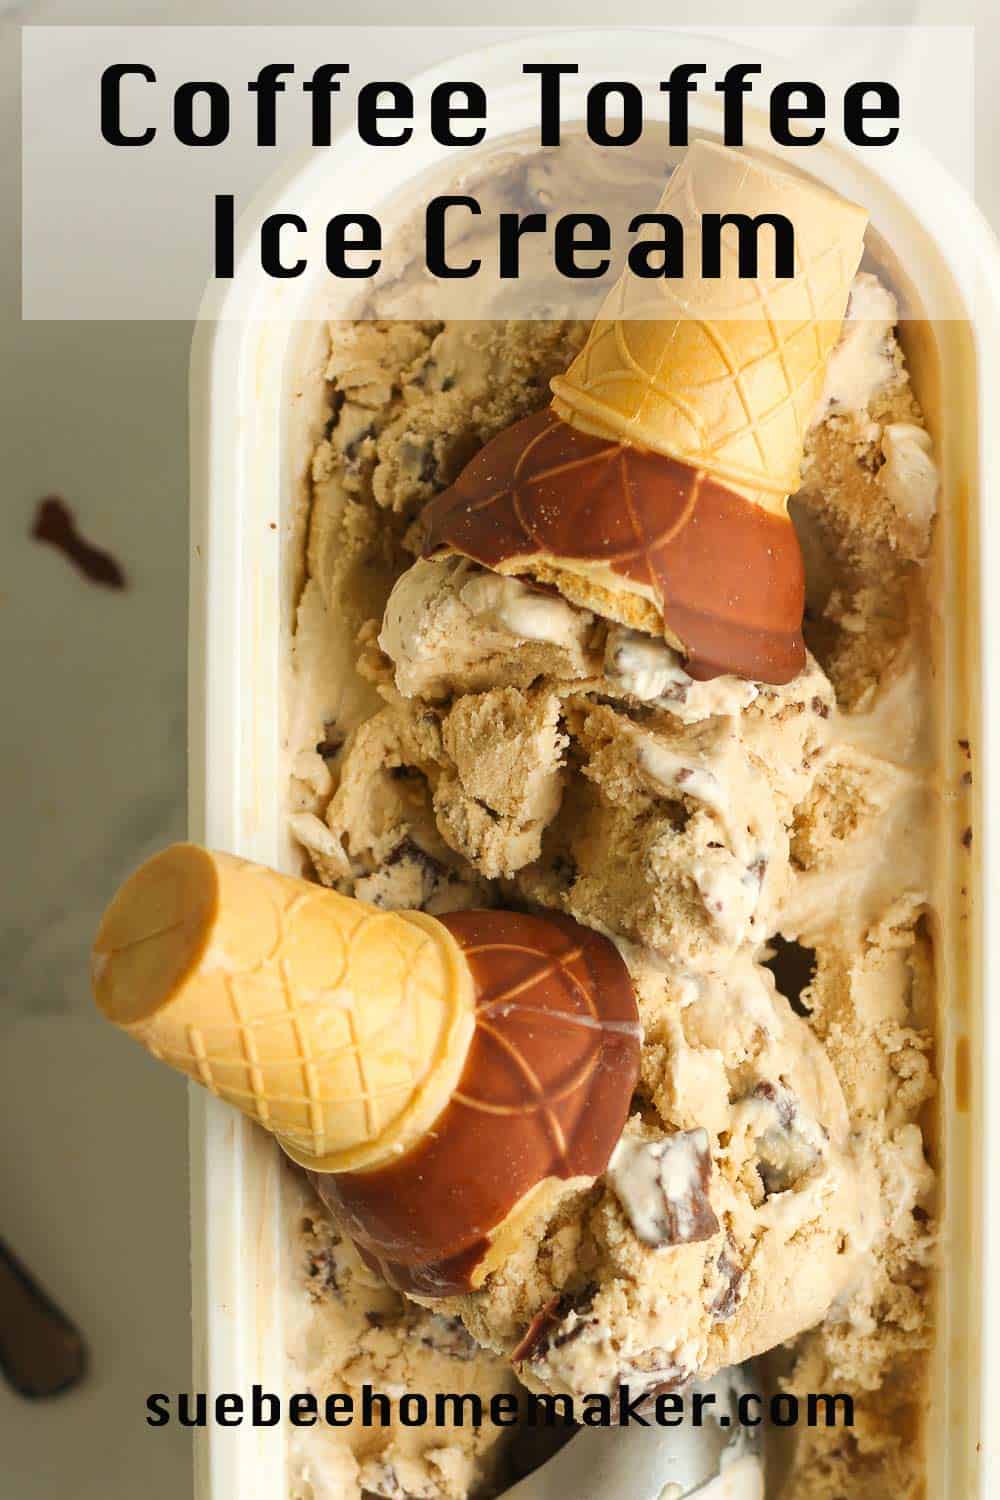 A container of coffee toffee ice cream, with two cones in the middle.